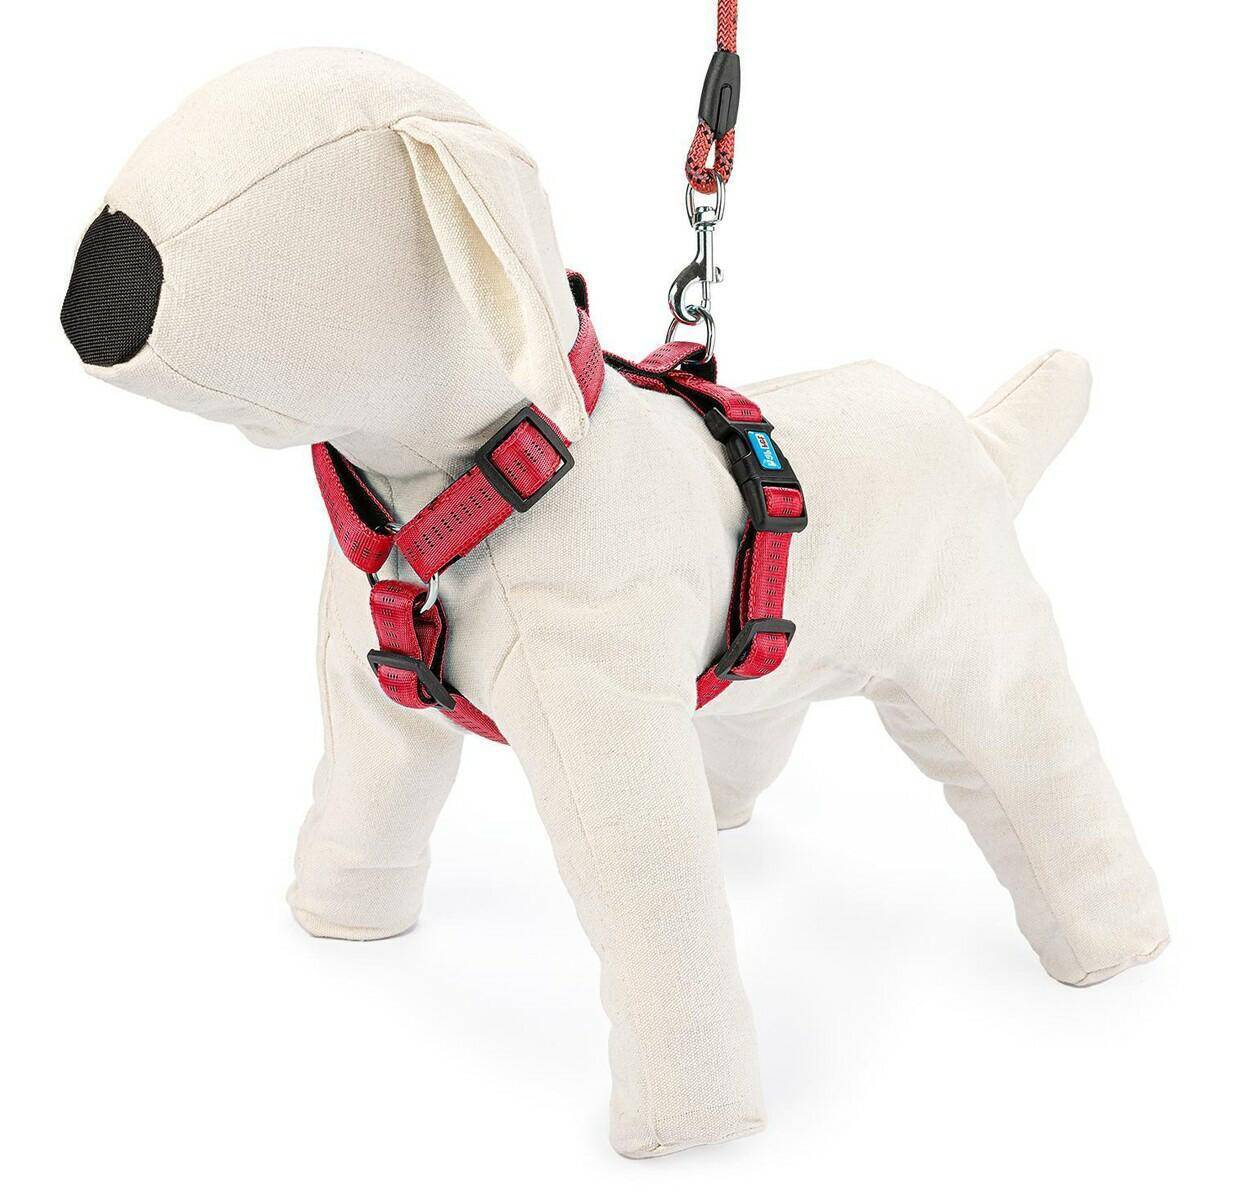  'Soft Style' Adjustable Harness S Red